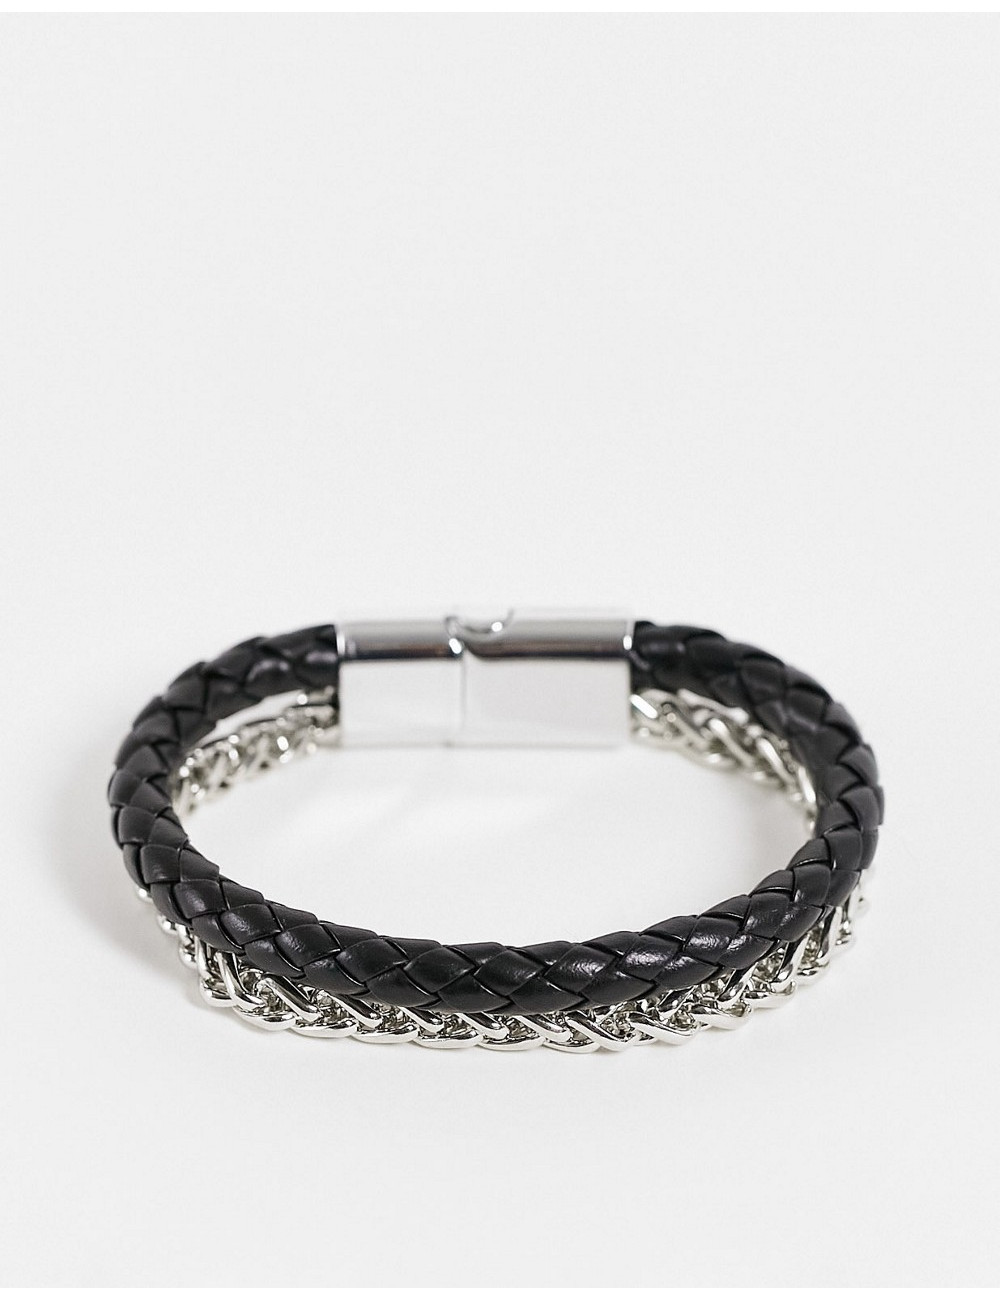 SVNX chain and rope bracelet